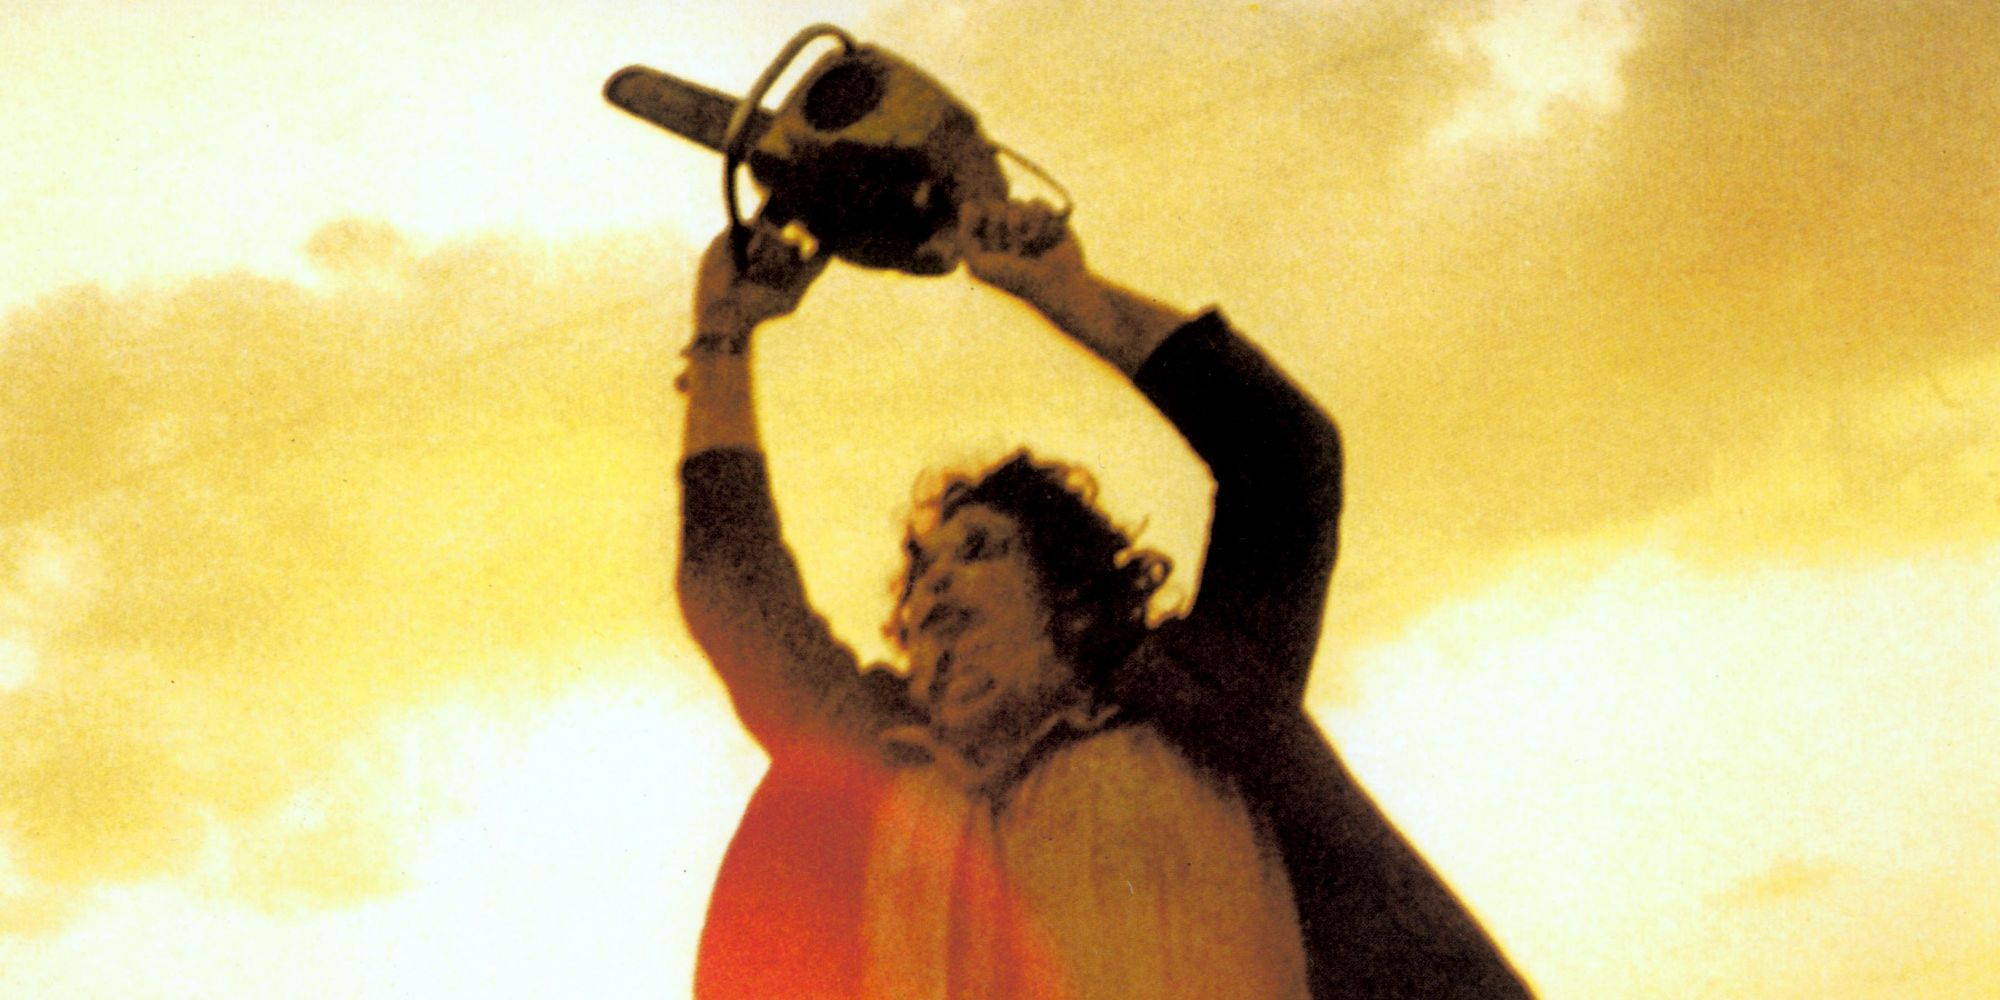 Leatherface raising his chainsaw at the end of The Texas Chain Saw Massacre